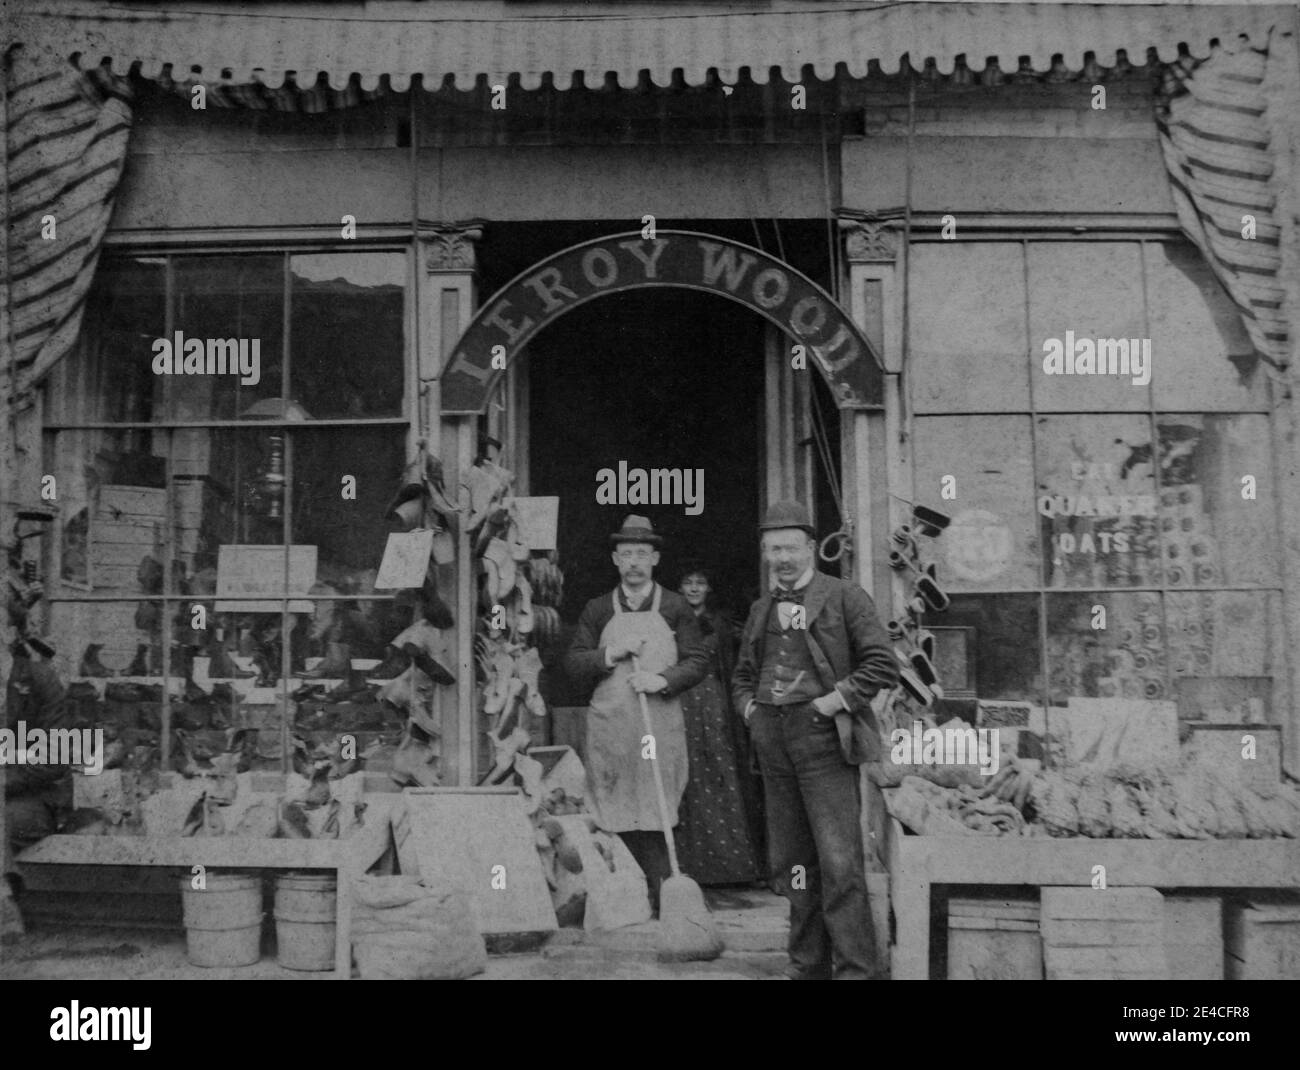 American archive monochrome portrait  of a grocer shop or general store front with an arched sign with name Leroy Wood and an advert in the window saying  Eat Quaker Oats and merchandise for sale on display. Two men are wearing bowler hats. A man is holding a broom, and a woman is standing behind the men. Taken in the late 19th century in NY, USA Stock Photo